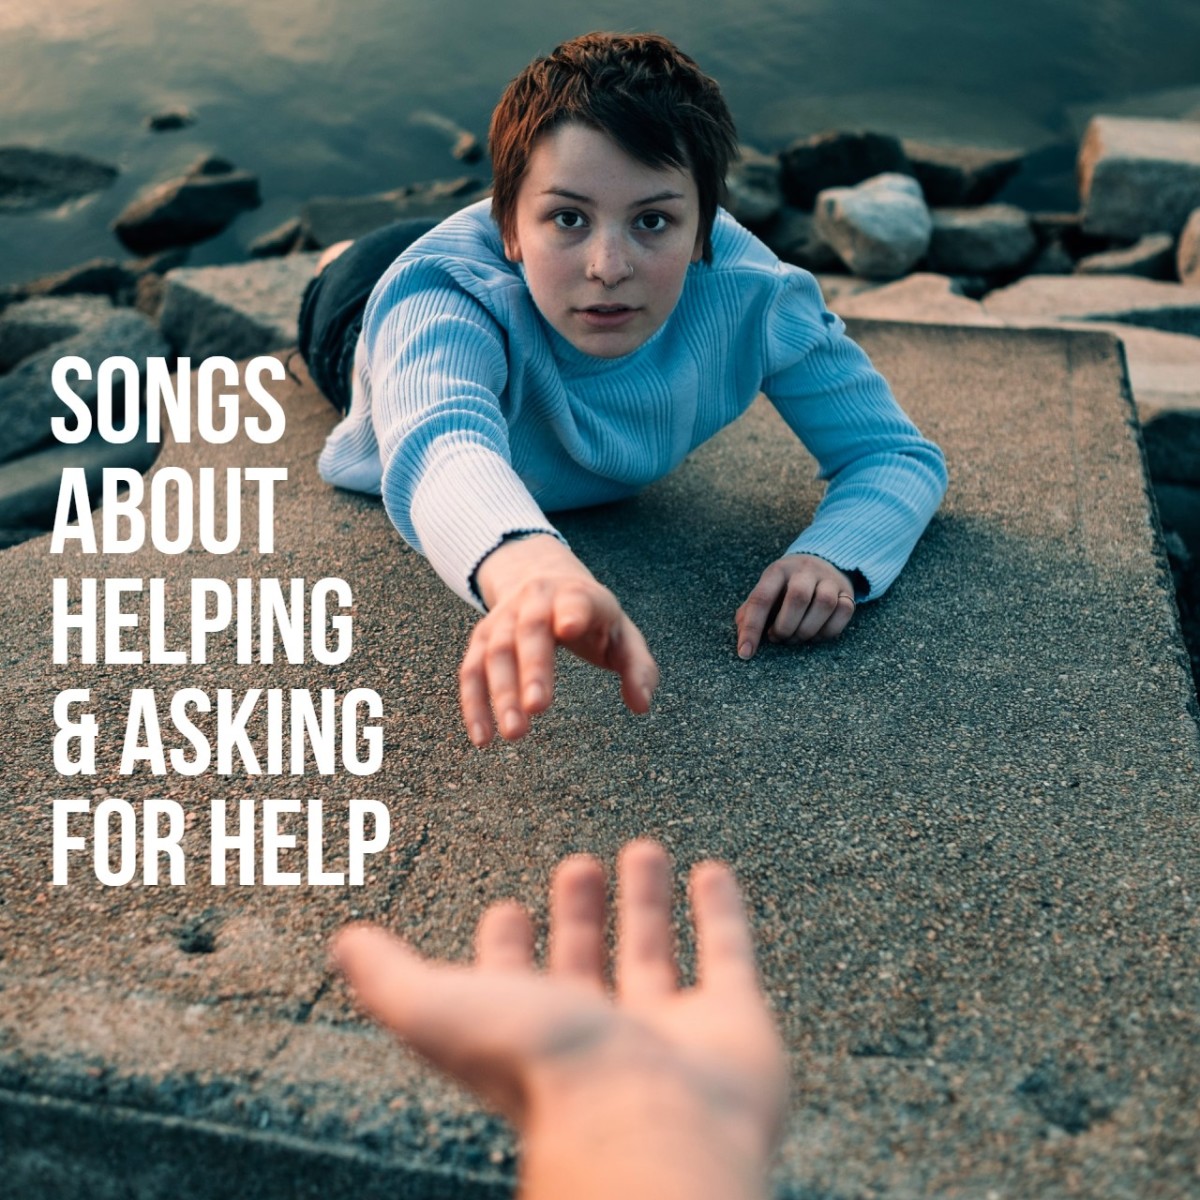 Celebrate the importance of helping others and asking for assistance when you need it with a playlist of pop, rock, R&B, and country songs.